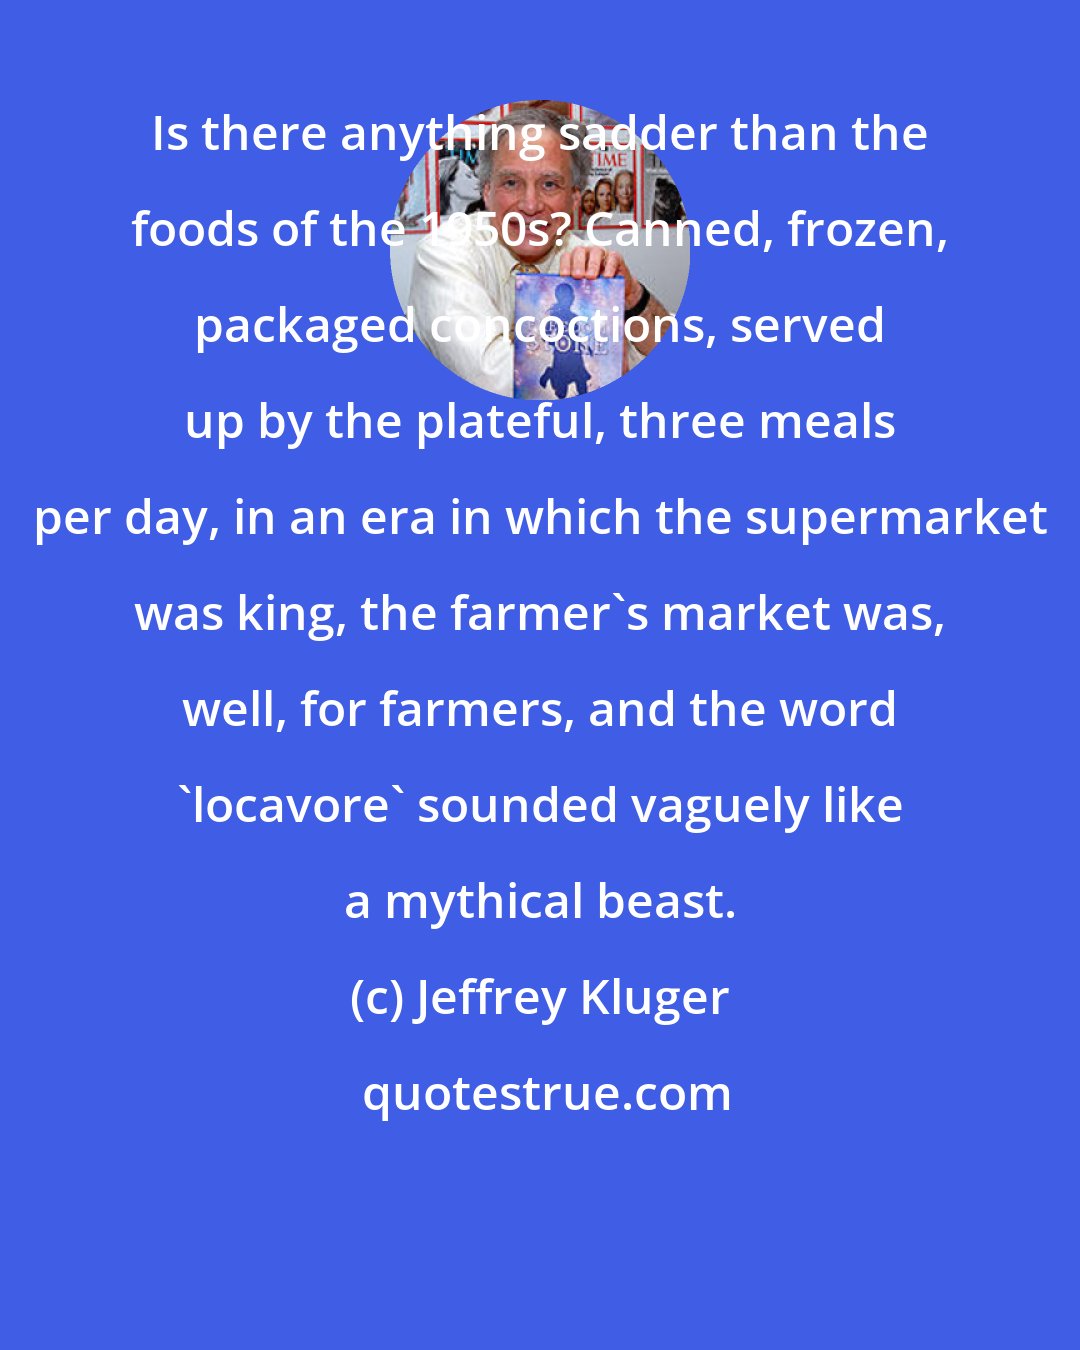 Jeffrey Kluger: Is there anything sadder than the foods of the 1950s? Canned, frozen, packaged concoctions, served up by the plateful, three meals per day, in an era in which the supermarket was king, the farmer's market was, well, for farmers, and the word 'locavore' sounded vaguely like a mythical beast.